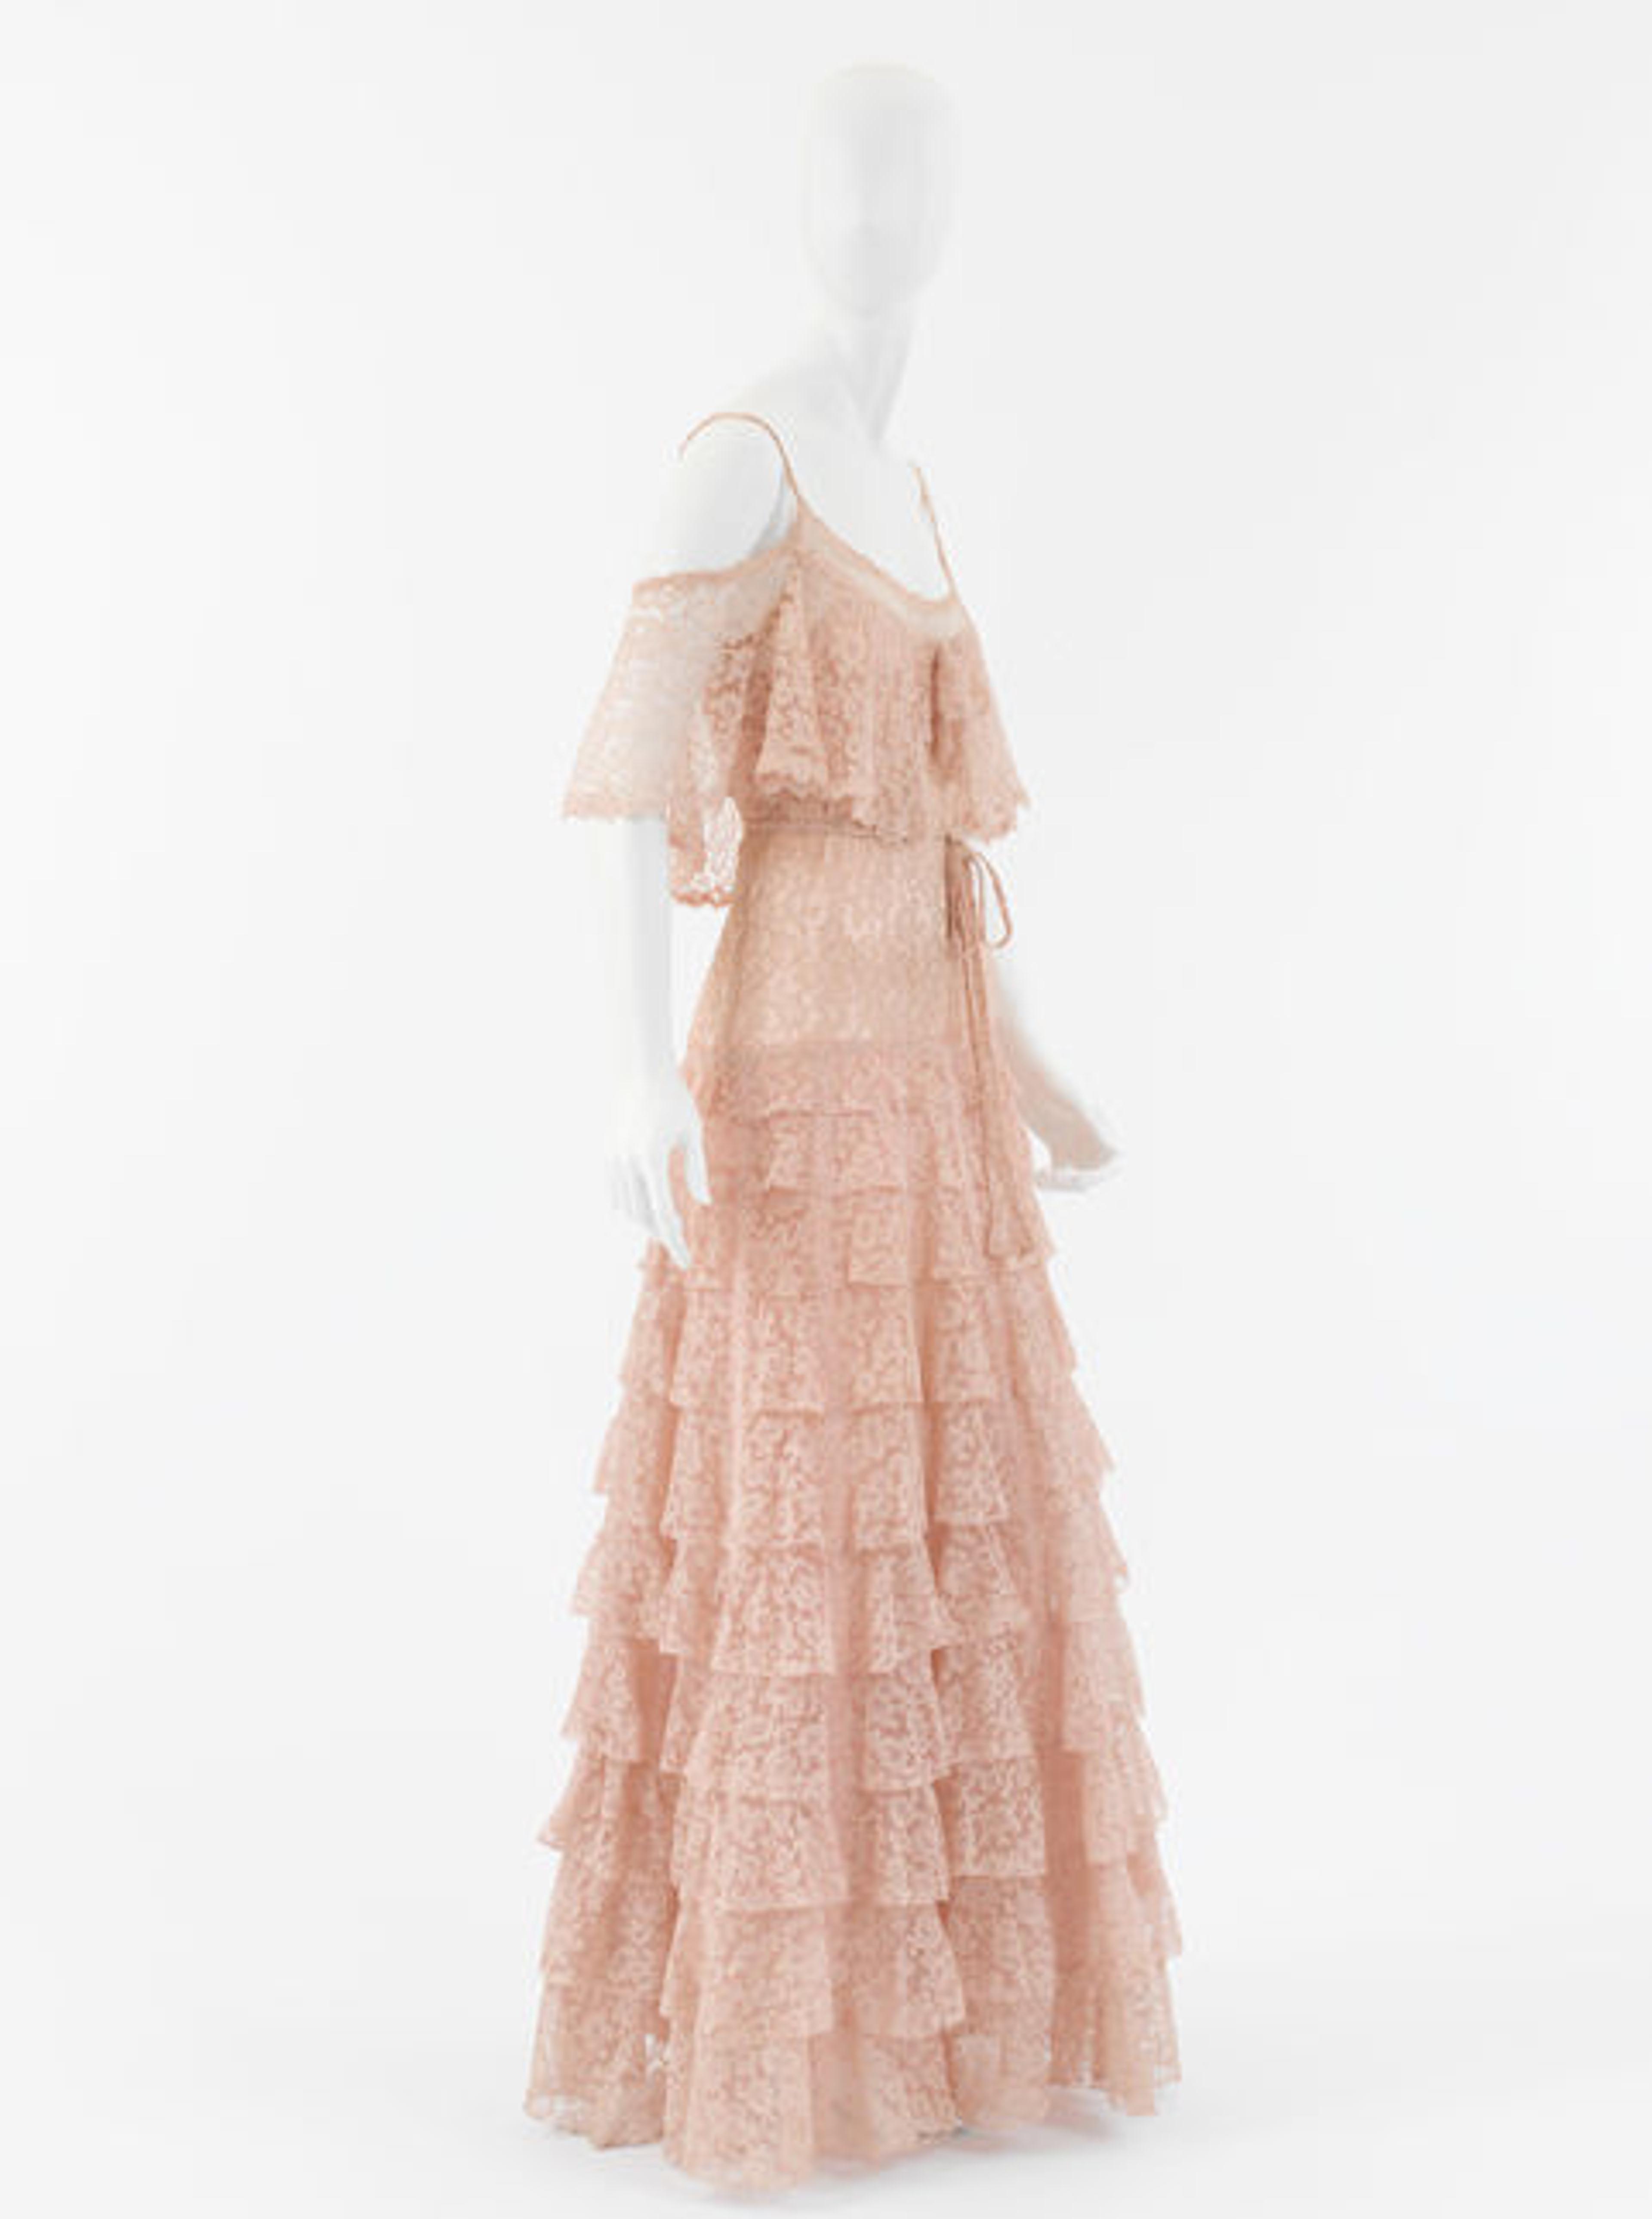 House of Chanel (French, founded 1913). Evening Dress, ca. 1930 (2004.447a, b)